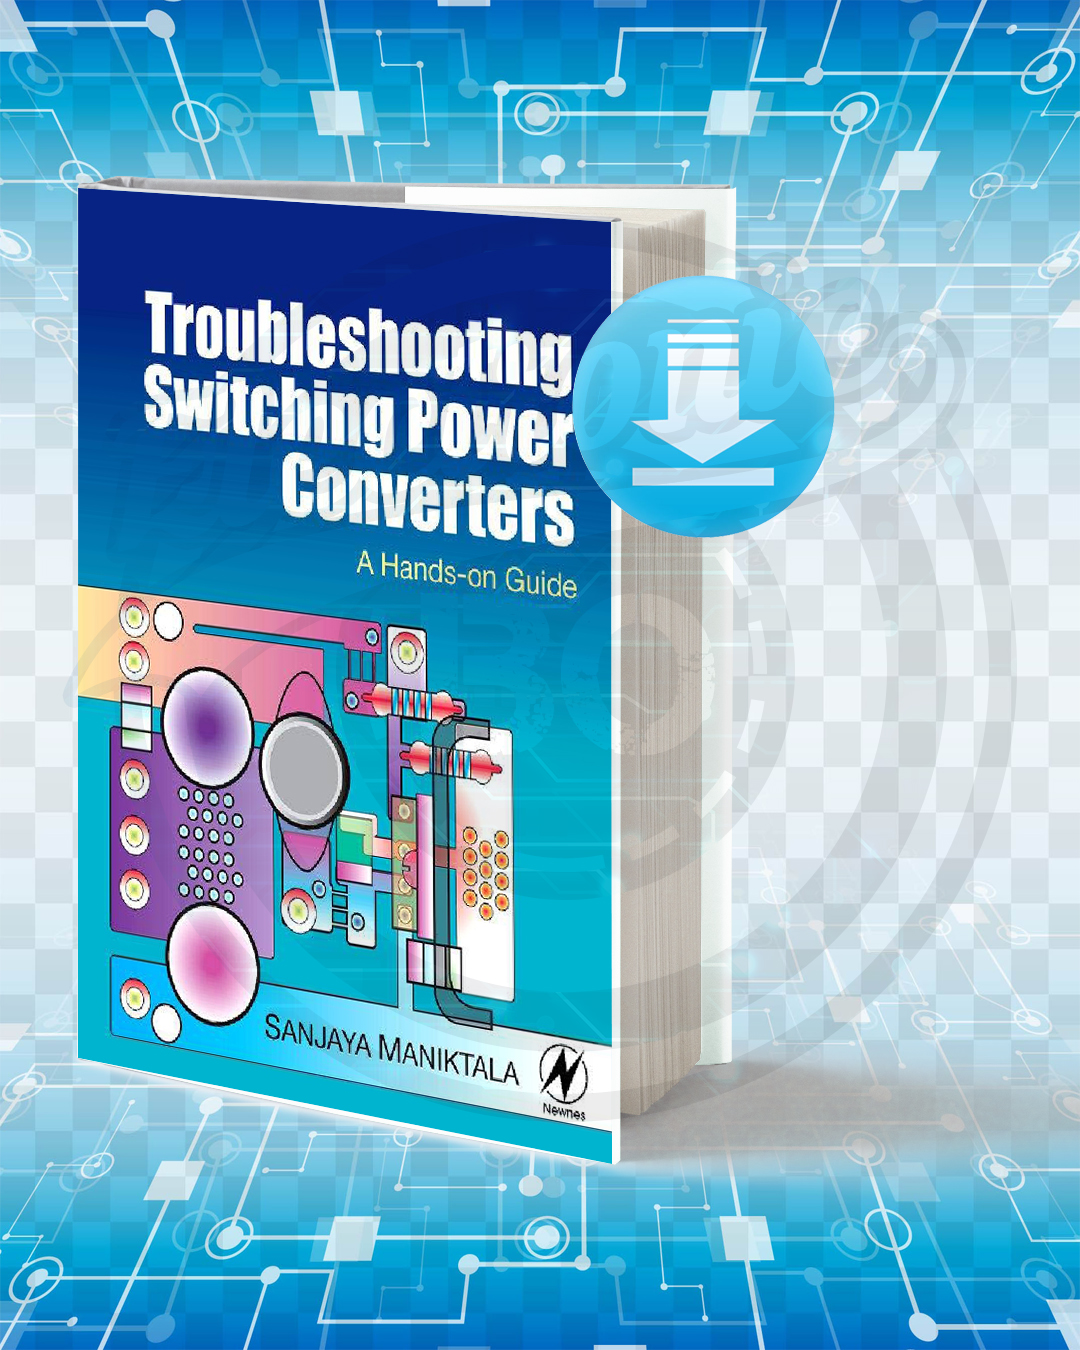 Free Book Troubleshooting Switching Power Converters pdf.